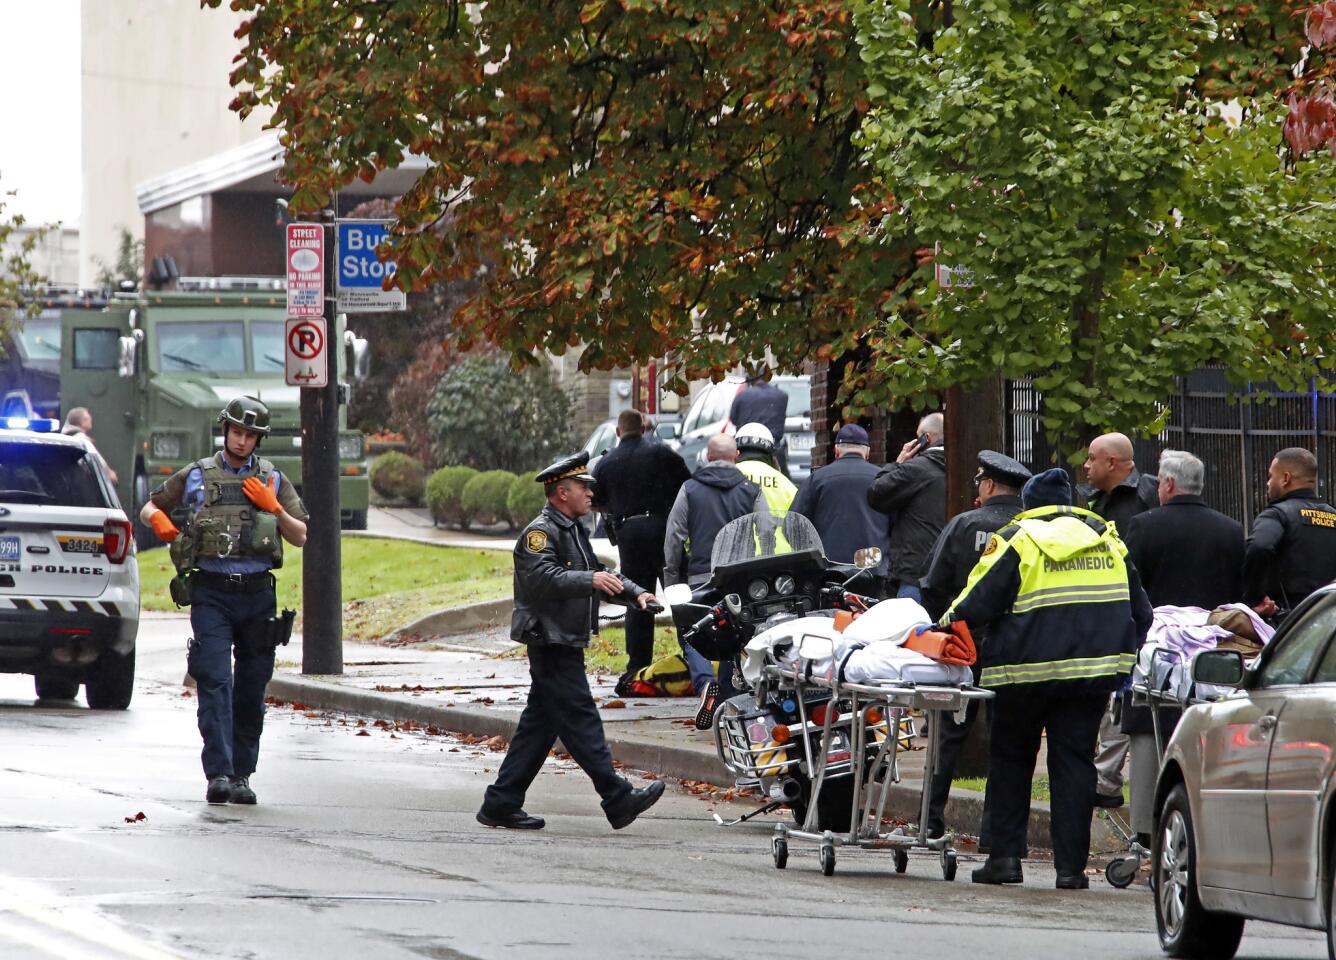 First responders surround the Tree of Life synagogue in Pittsburgh, where a shooter opened fire Oct. 27, 2018.